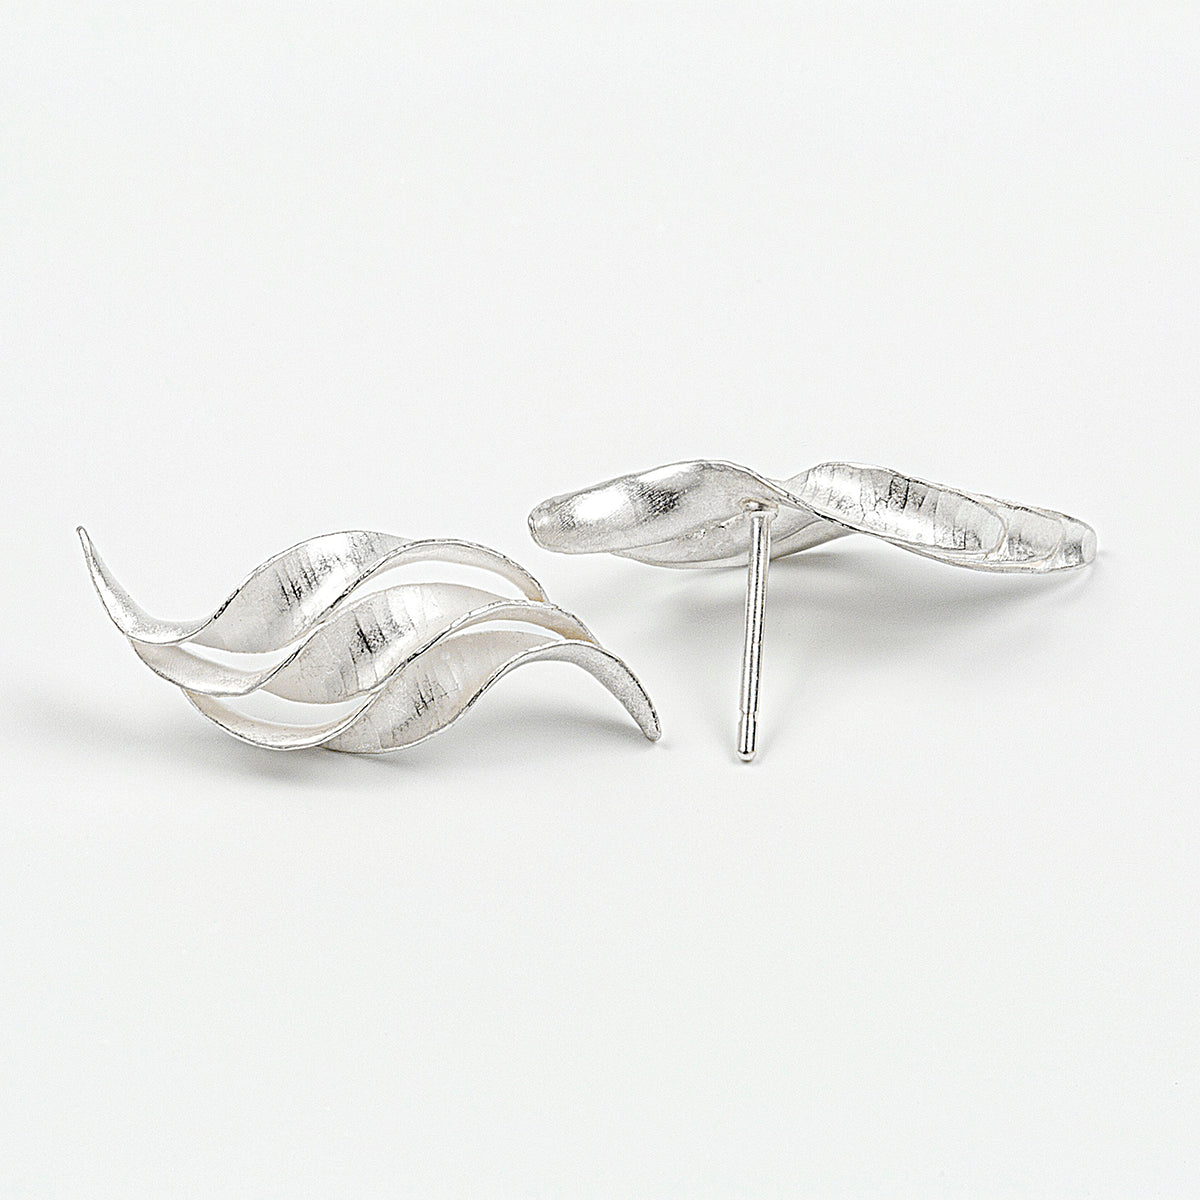 A pair of silver wedding earrings in the form of a triple wave of parallel curling, twisting S-shapes. They have a hammered texture, non-reflective surface and burnished edges. This view shows one earring from the front and the other showing how the pin attaches at the back.